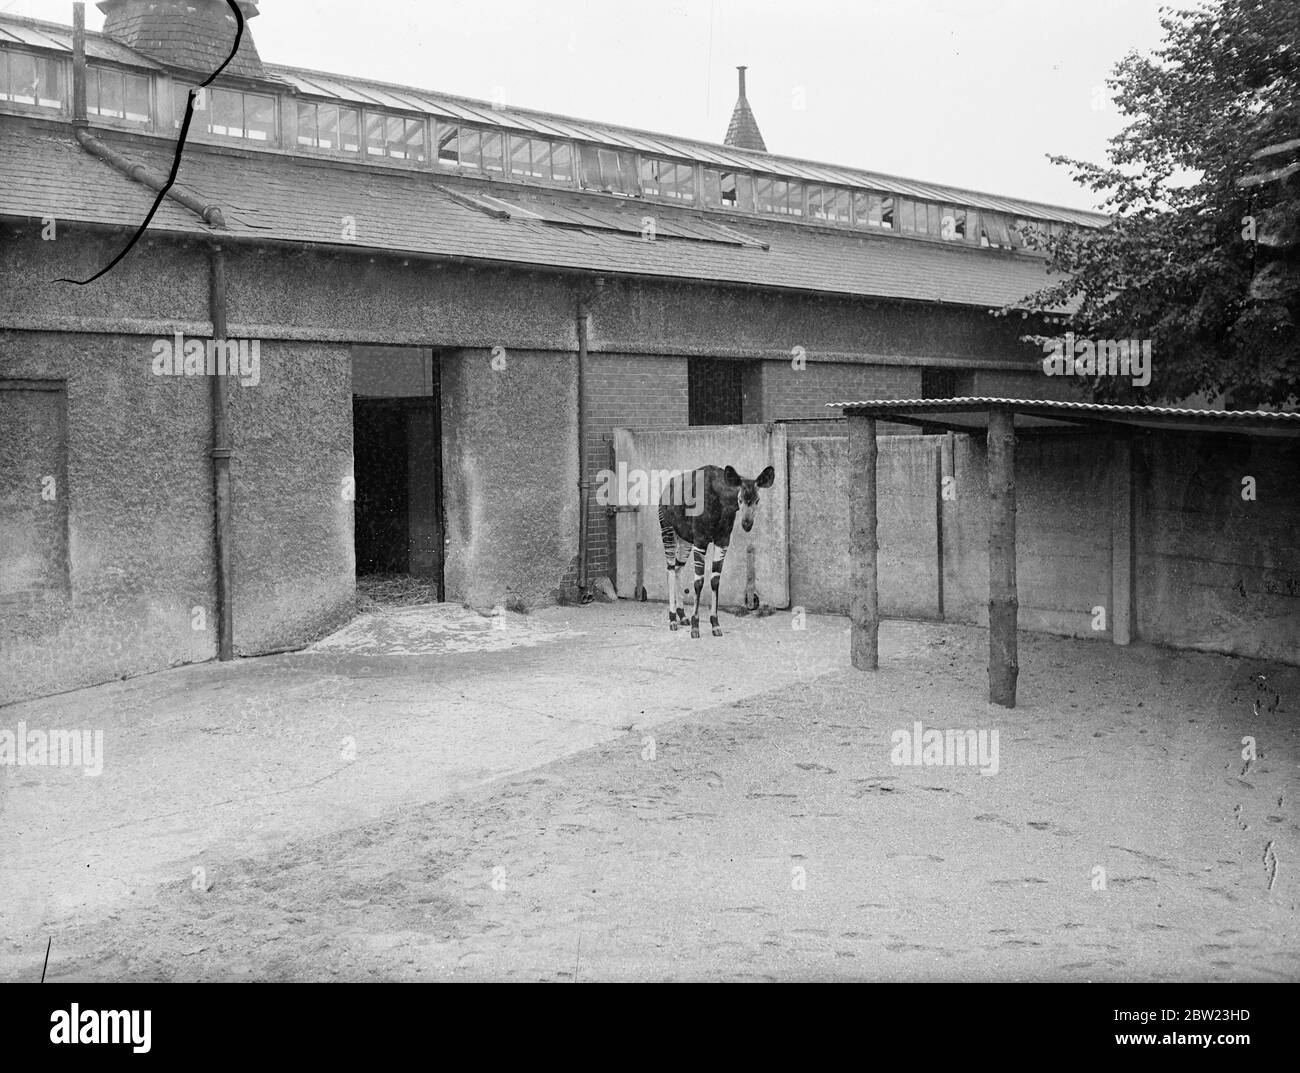 The London Zoo's new okapi , which was presented by the King , who received it from King Leopold of the Belgians, from the Belgian Congo. He arrived at his new home and tucked into a hearty meal . 21 July 1937 Stock Photo